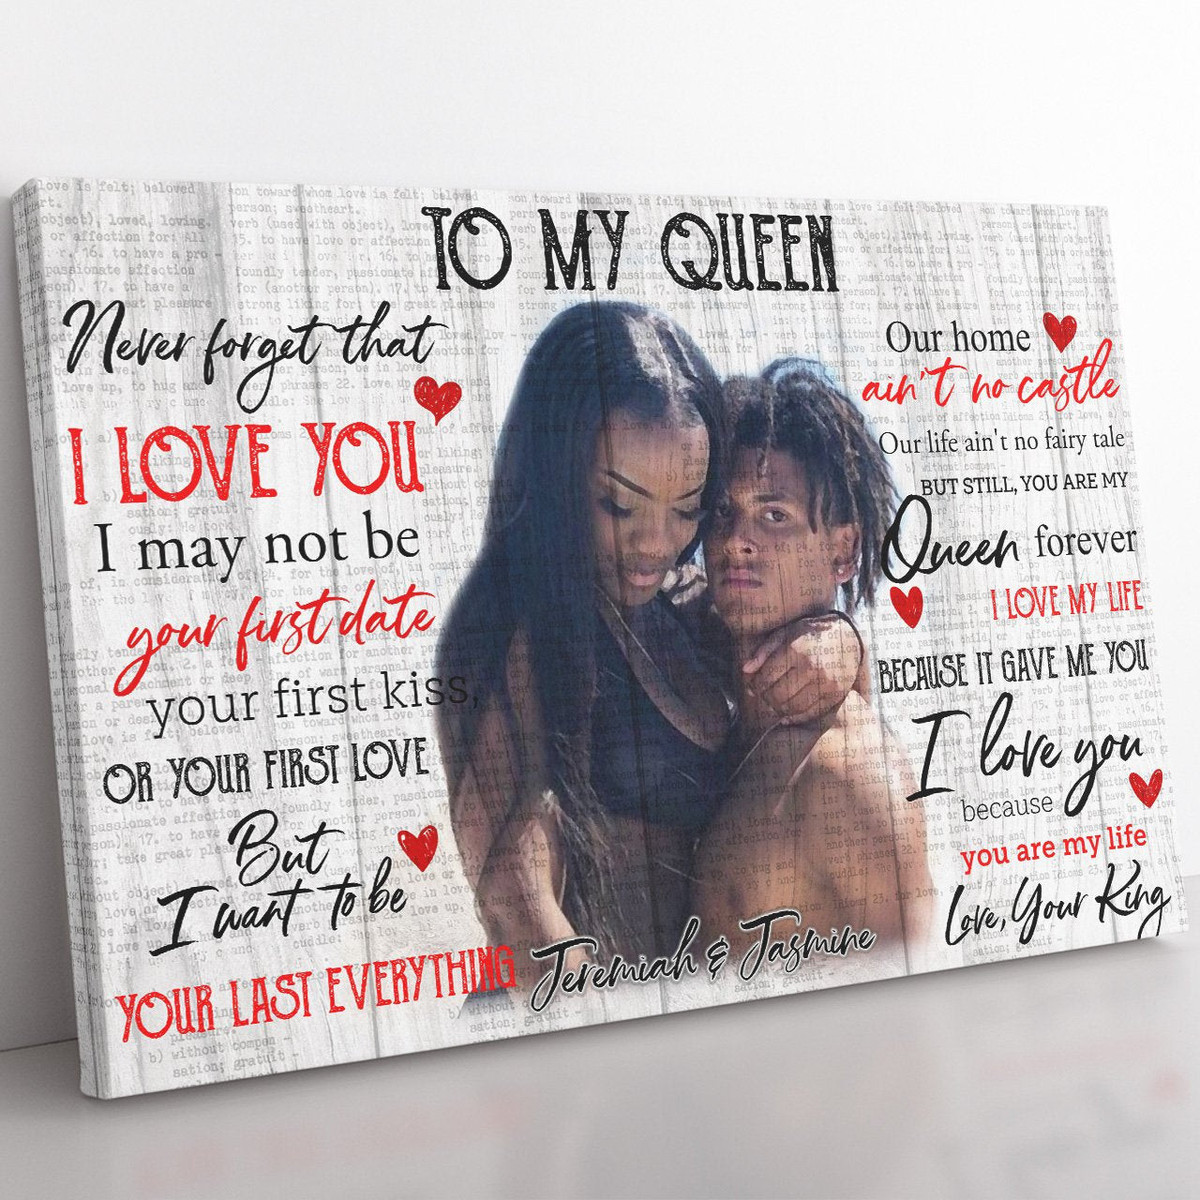 To My Black Queen Gift Ideas Gift Ideas, I Want to be Your Last Gift Ideas, You're My Life Gift Ideas for Black Wife Framed Prints, Canvas Paintings Wrapped Canvas 8x10